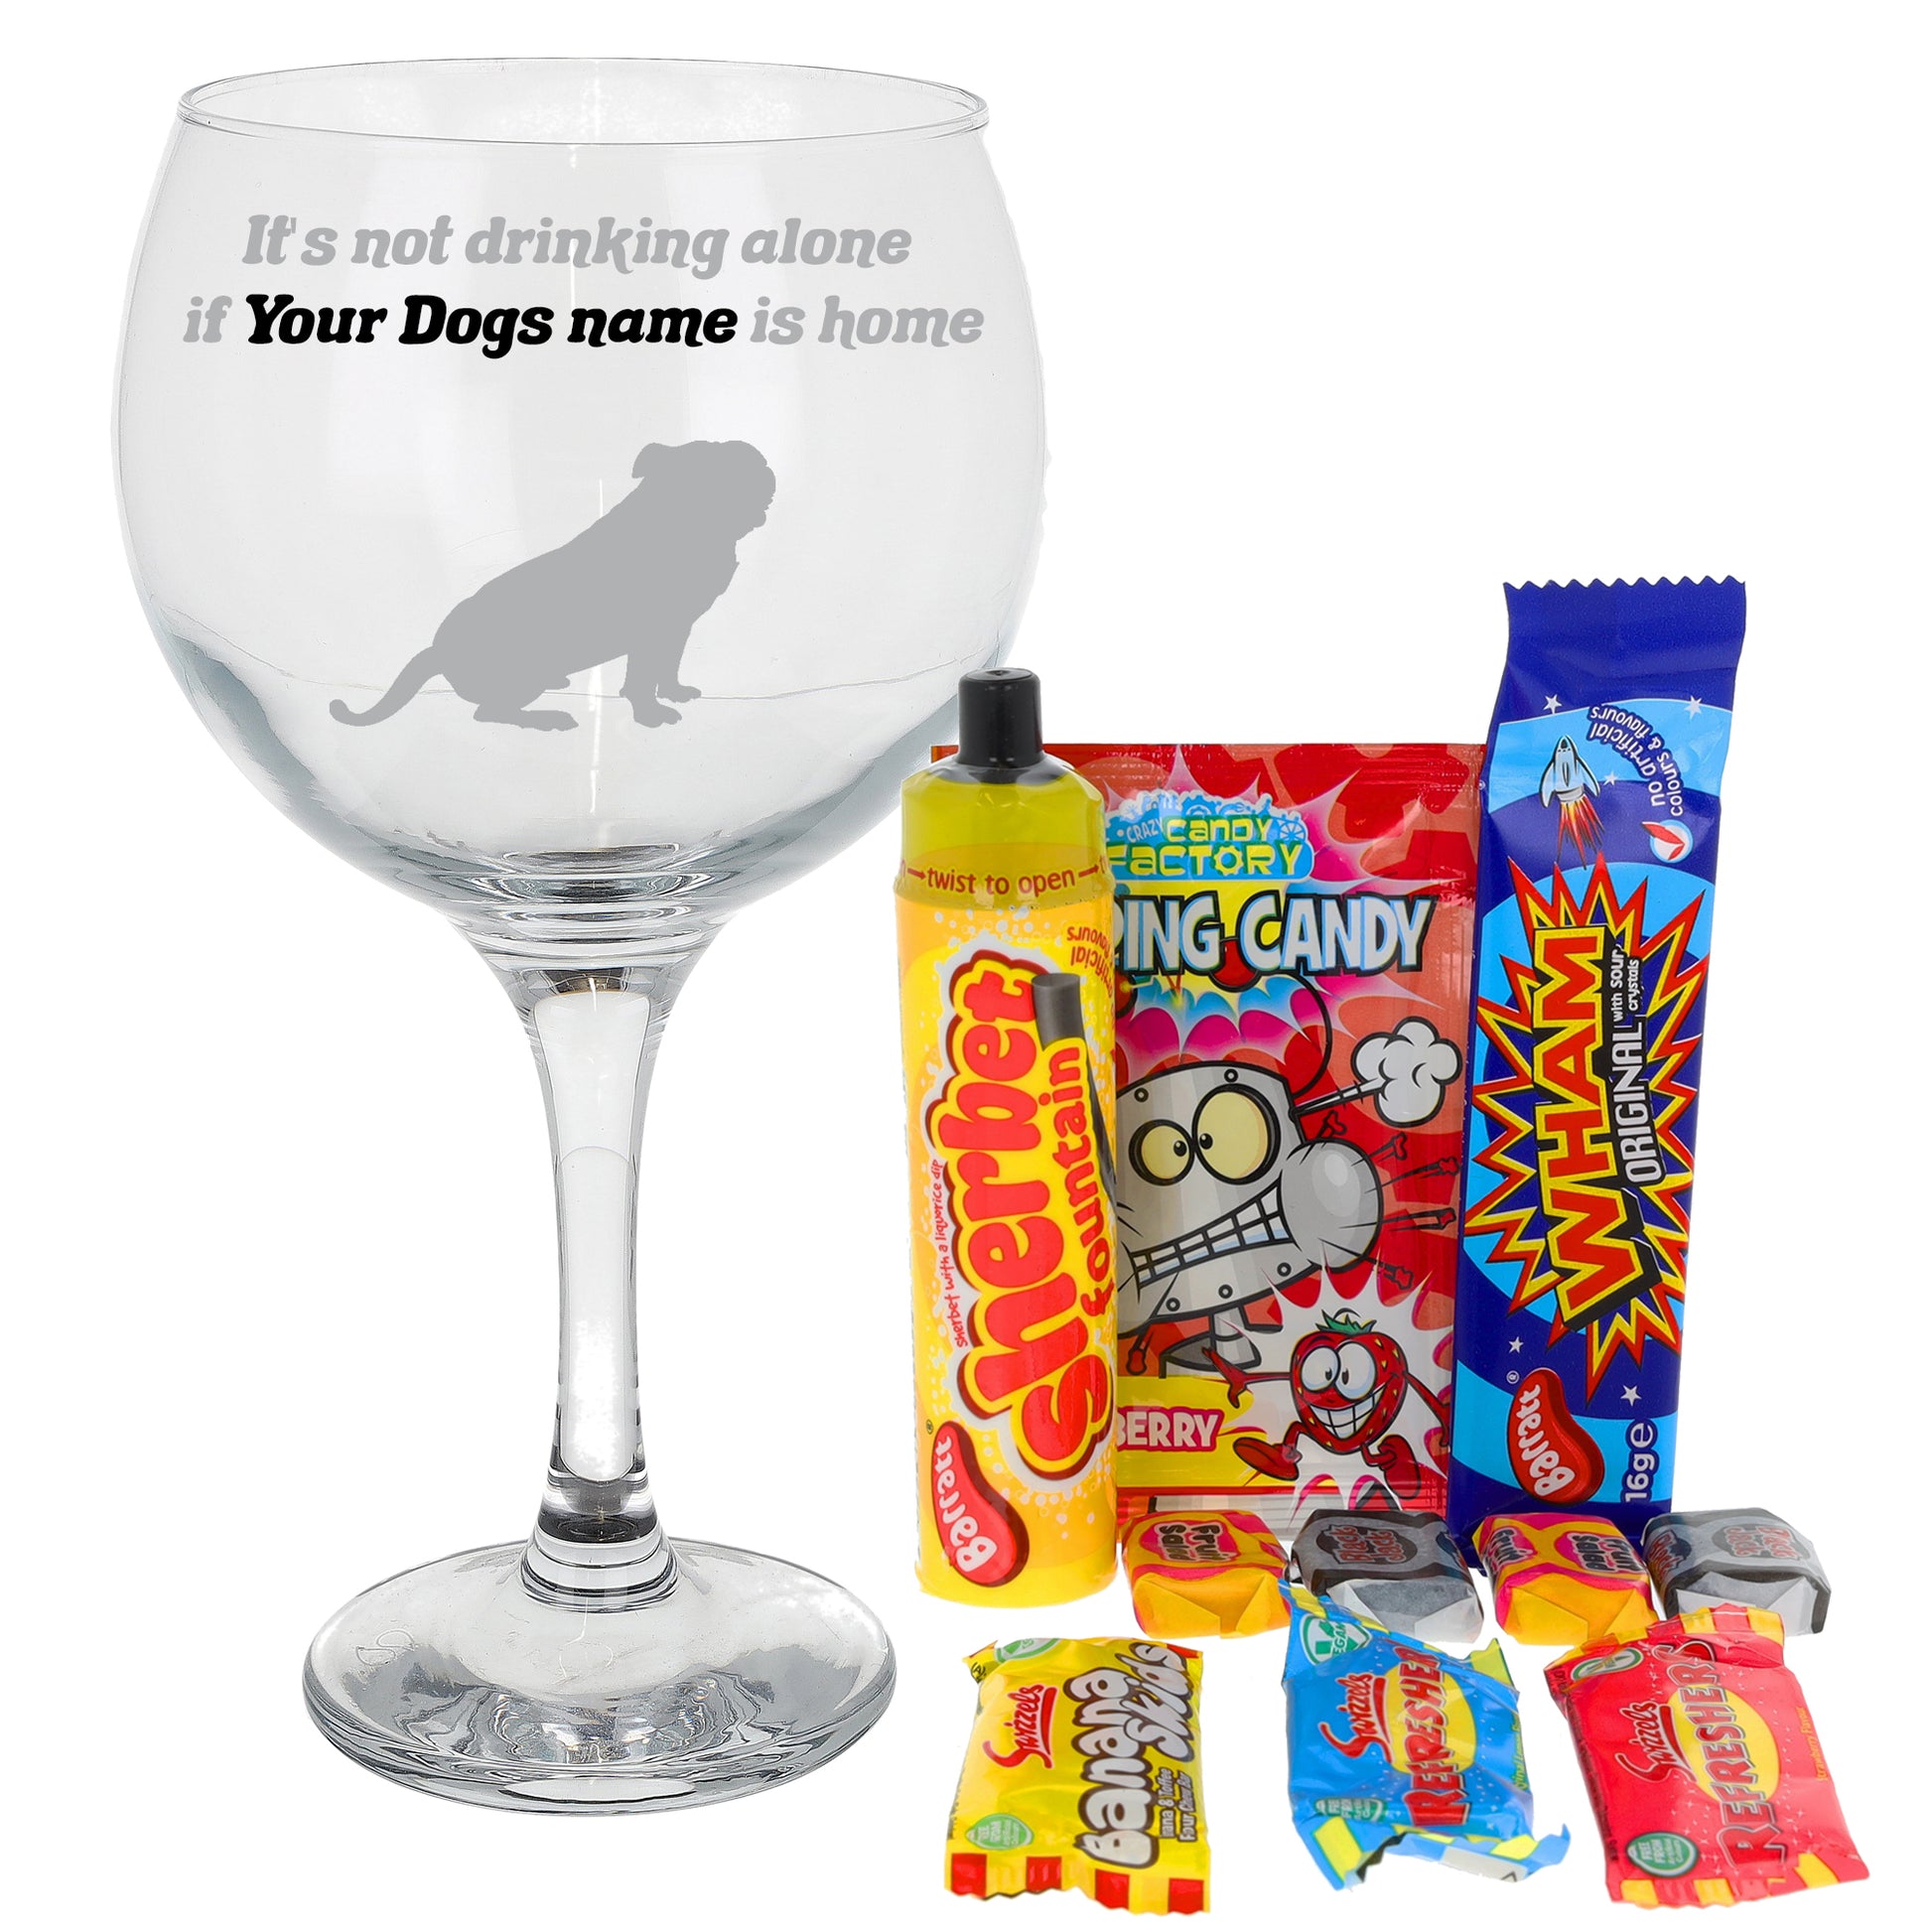 Engraved Personalised Dog Breed Gin Glass  - Always Looking Good - Filled with Retro Sweets  